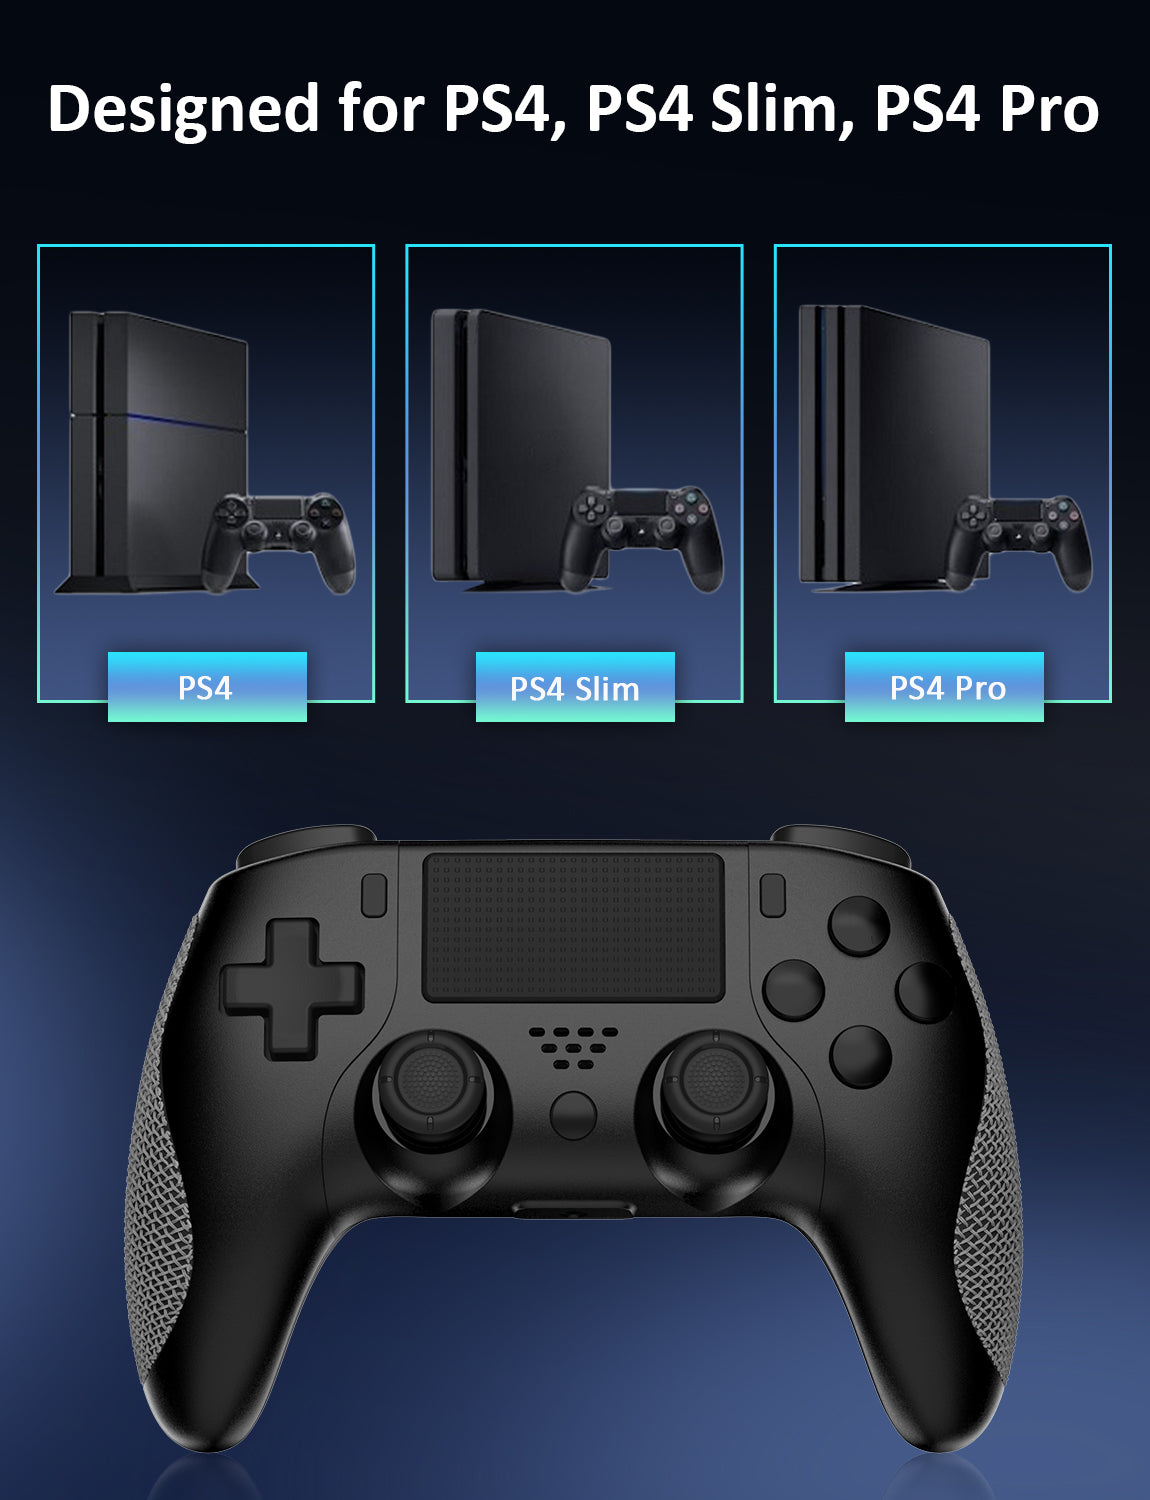 The PS4 controller is compatible with PS4, PS4 Slim, and PS4 Pro.